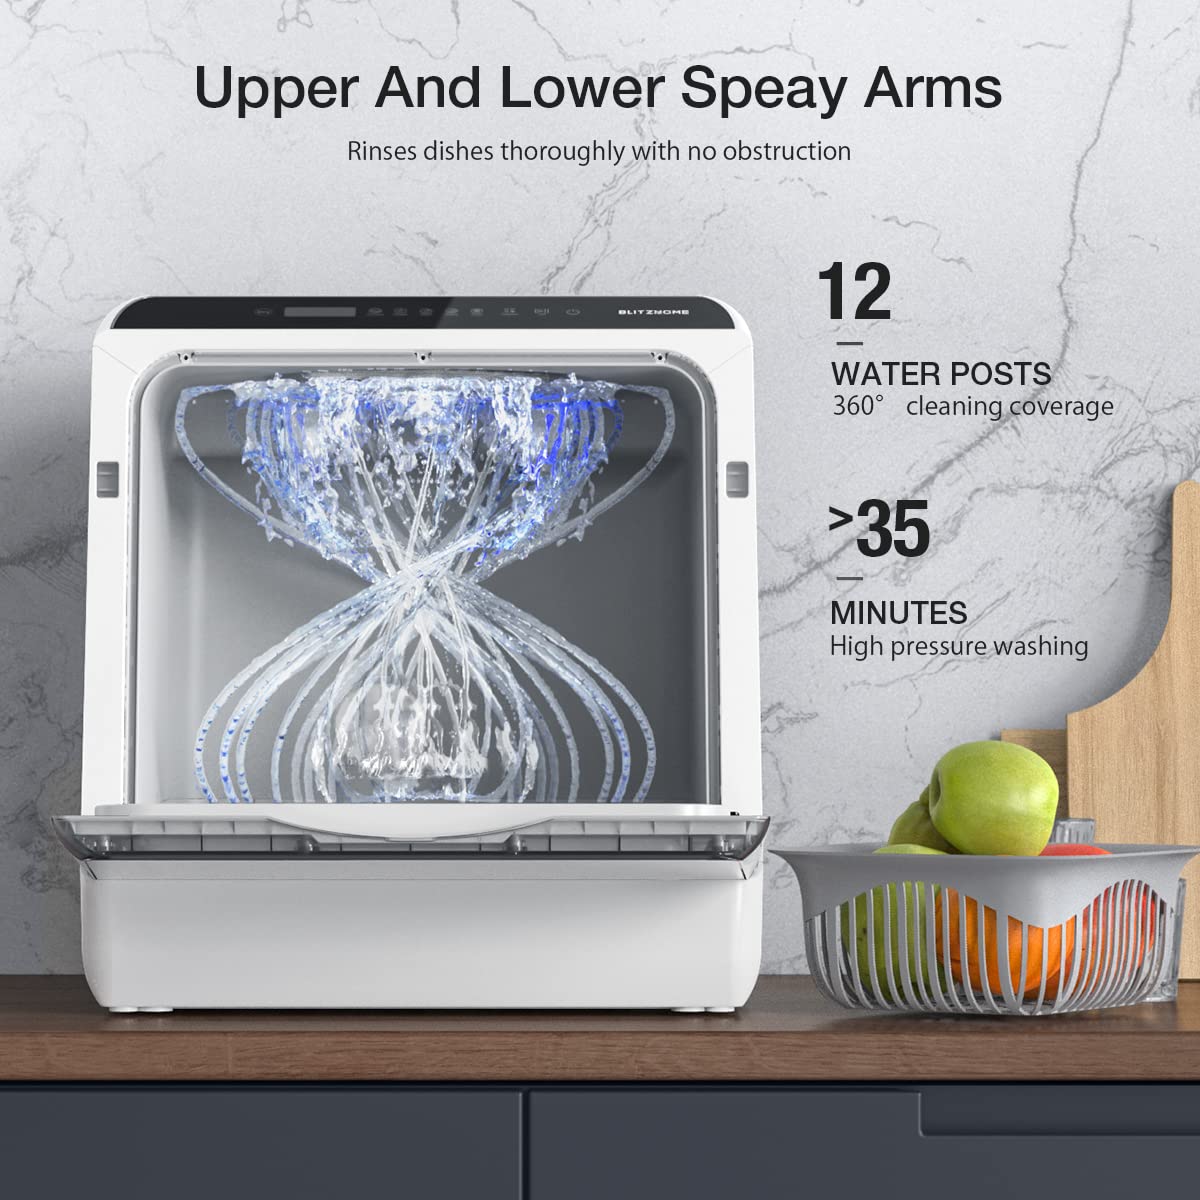 BLITZHOME Portable Dishwasher Countertop, WIFI Smart Dishwasher, Compact Dishwashers with 5L Built-in Water Tank, 6 Programs, 360° Dual Spray, High-Temp& Air-Dry Function, Fruit Cleaning